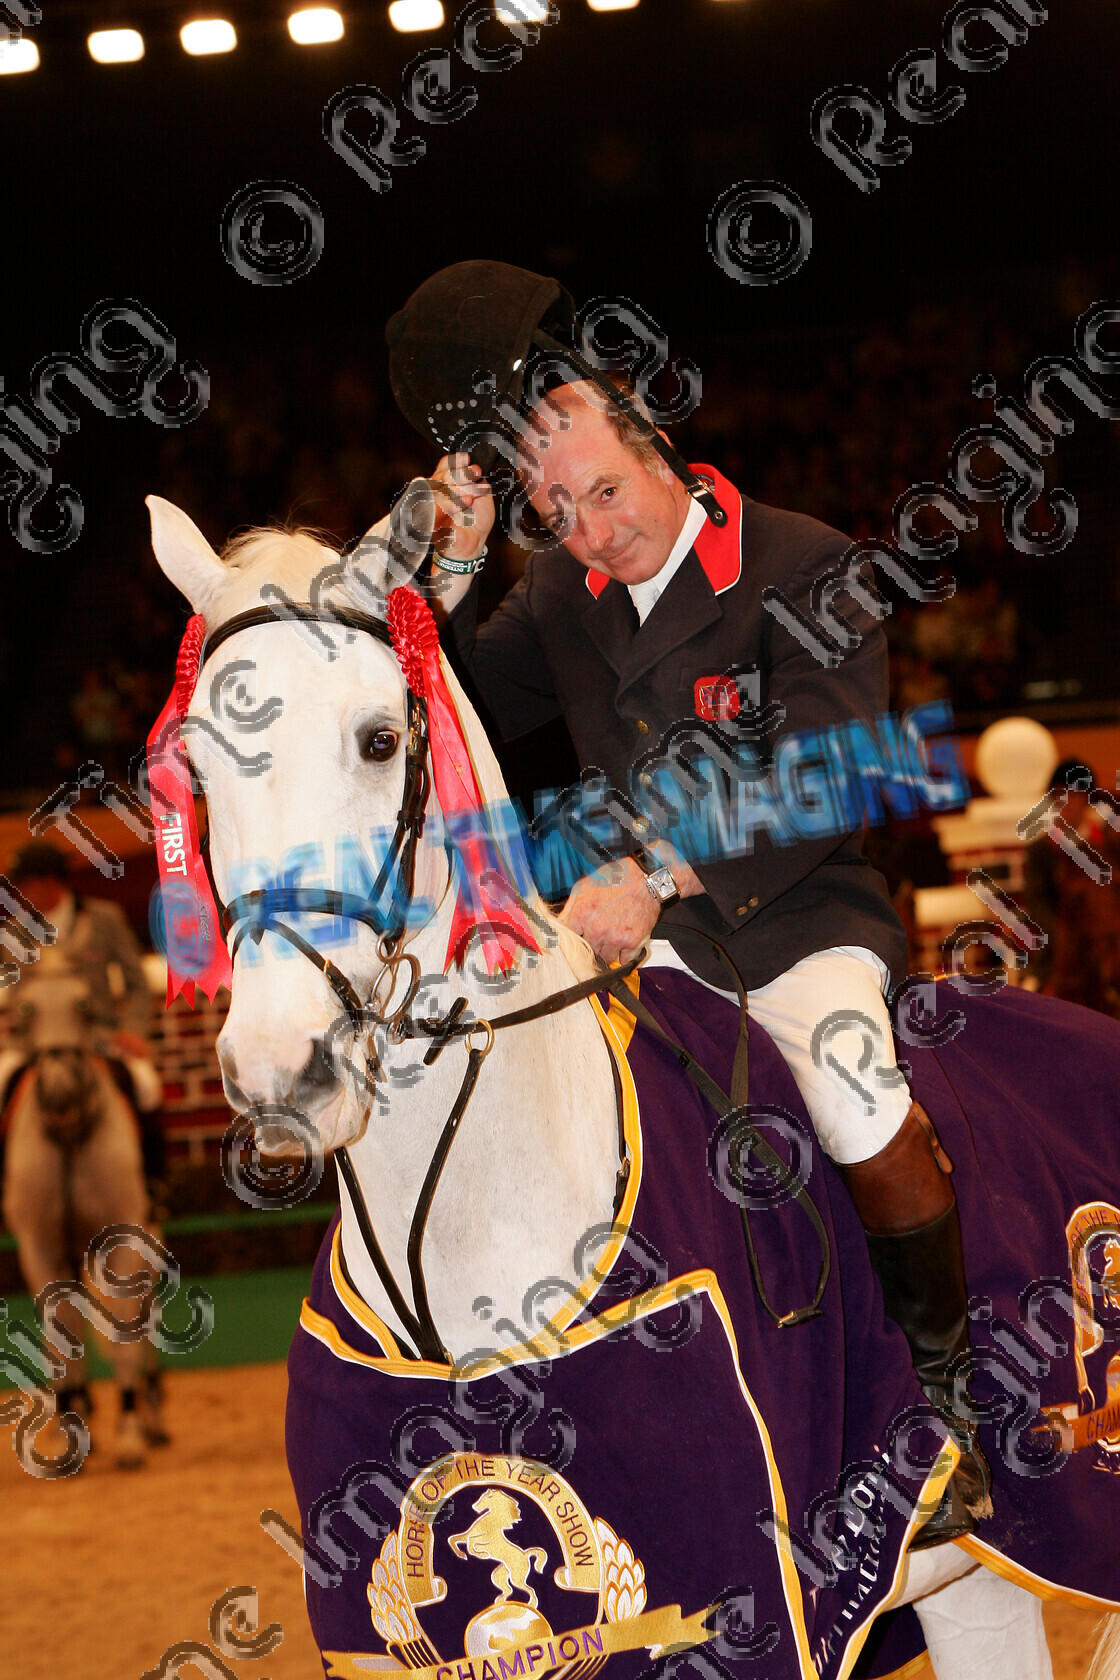 S05-67-12-076 
 HOYS 2005: The Horse Of The Year Show Puissance Winner 
 Keywords: horse of the year show 2005 05 hoys saturday 15 10 october showjumping showjumper 23 Puissance Winner 2 Lactic John Whitaker grey gray gelding standing presentation rug trophy rosette